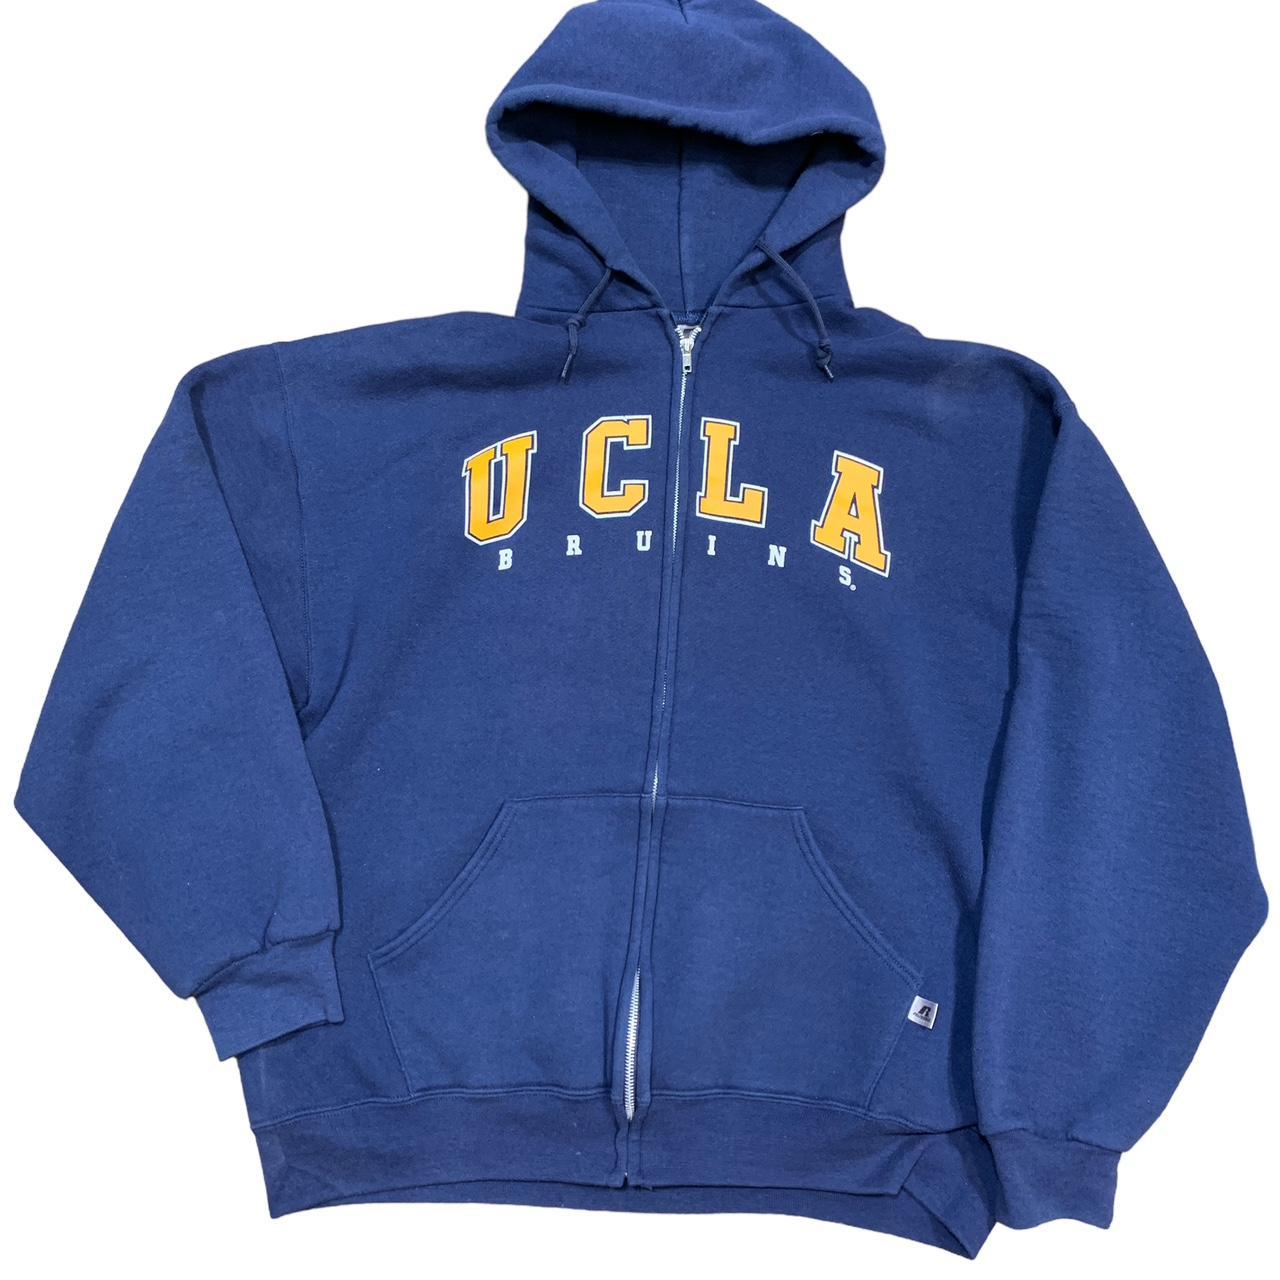 vintage russell ucla zip up free shipping📦 size:... - Depop